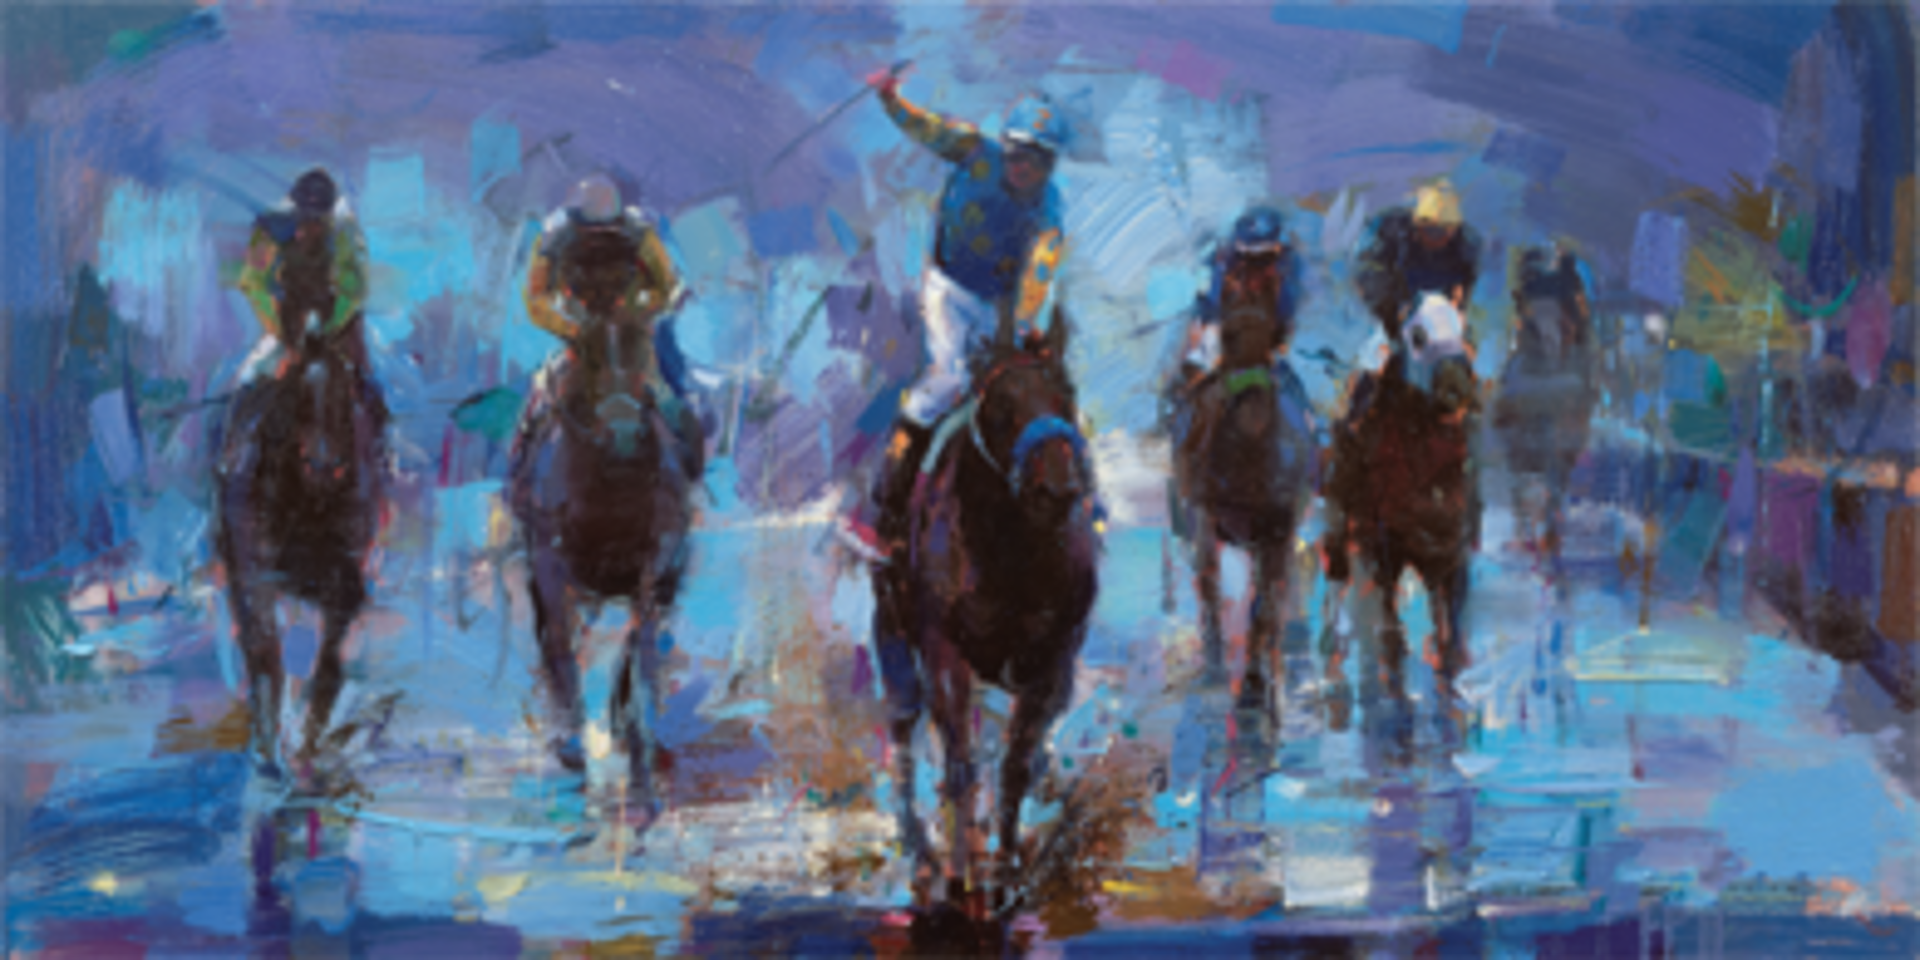 Win at the Preakness by Michael Flohr